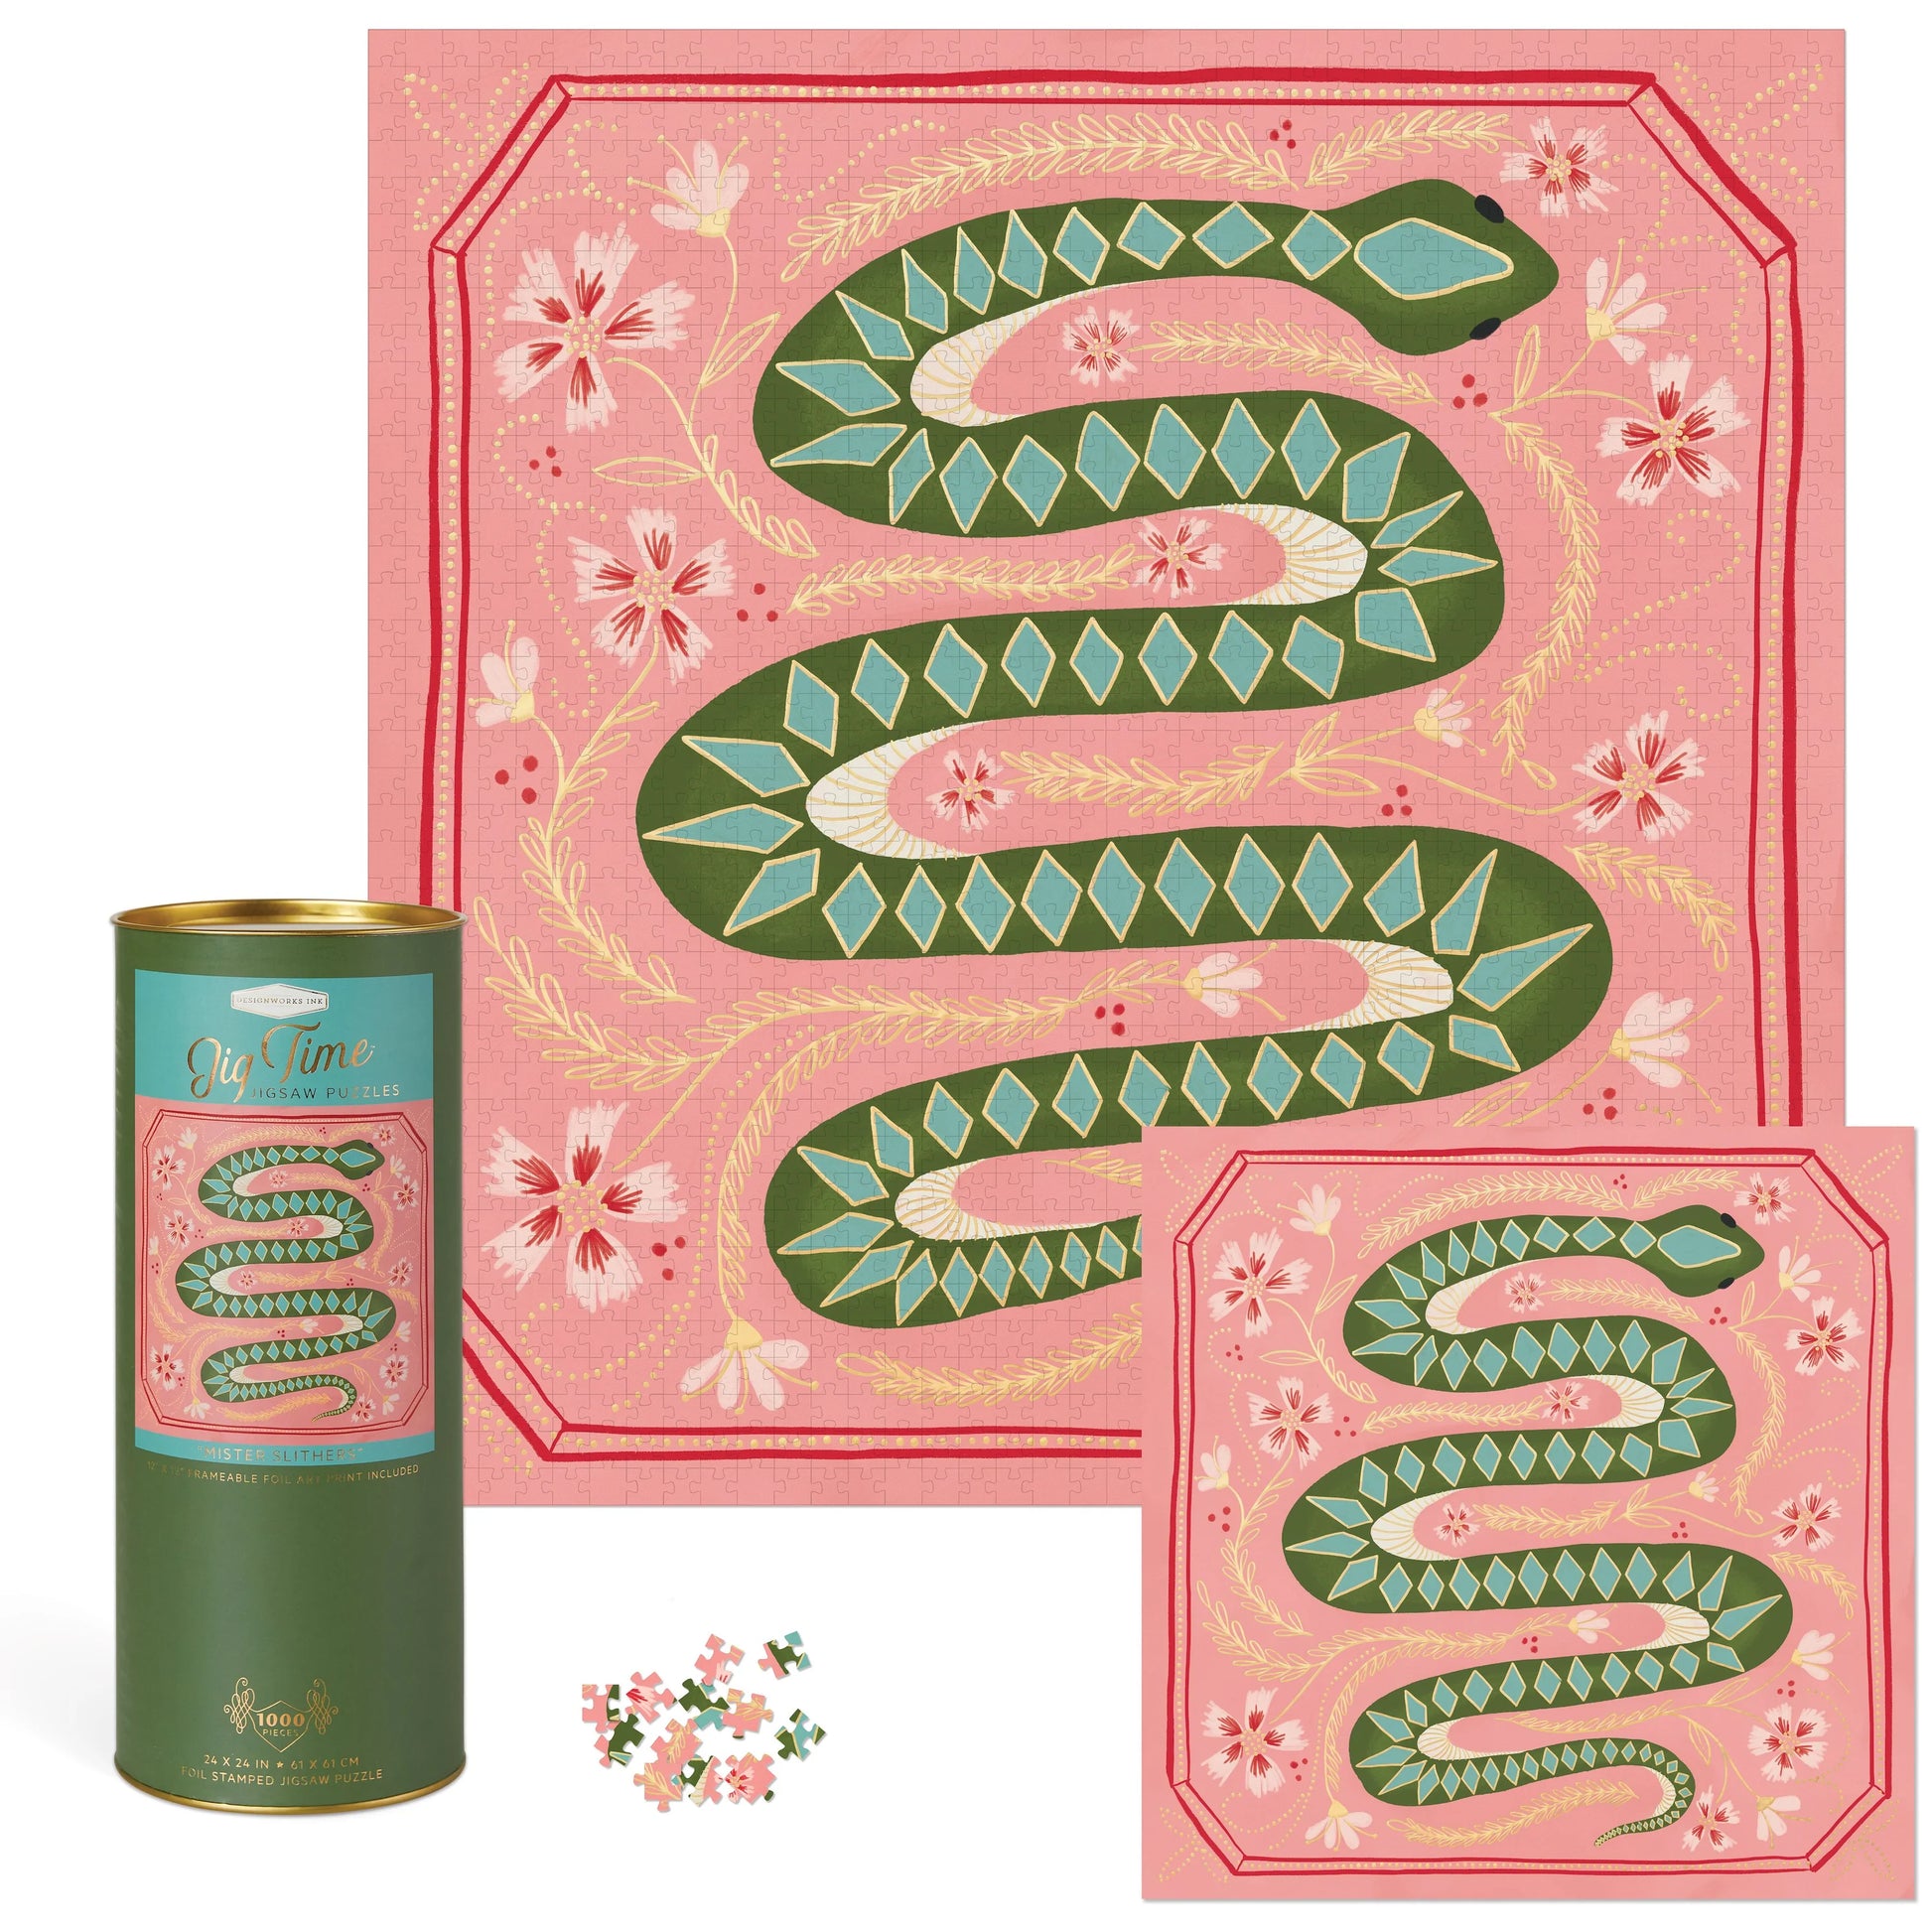 Mister Slithers 1000 Piece Puzzle